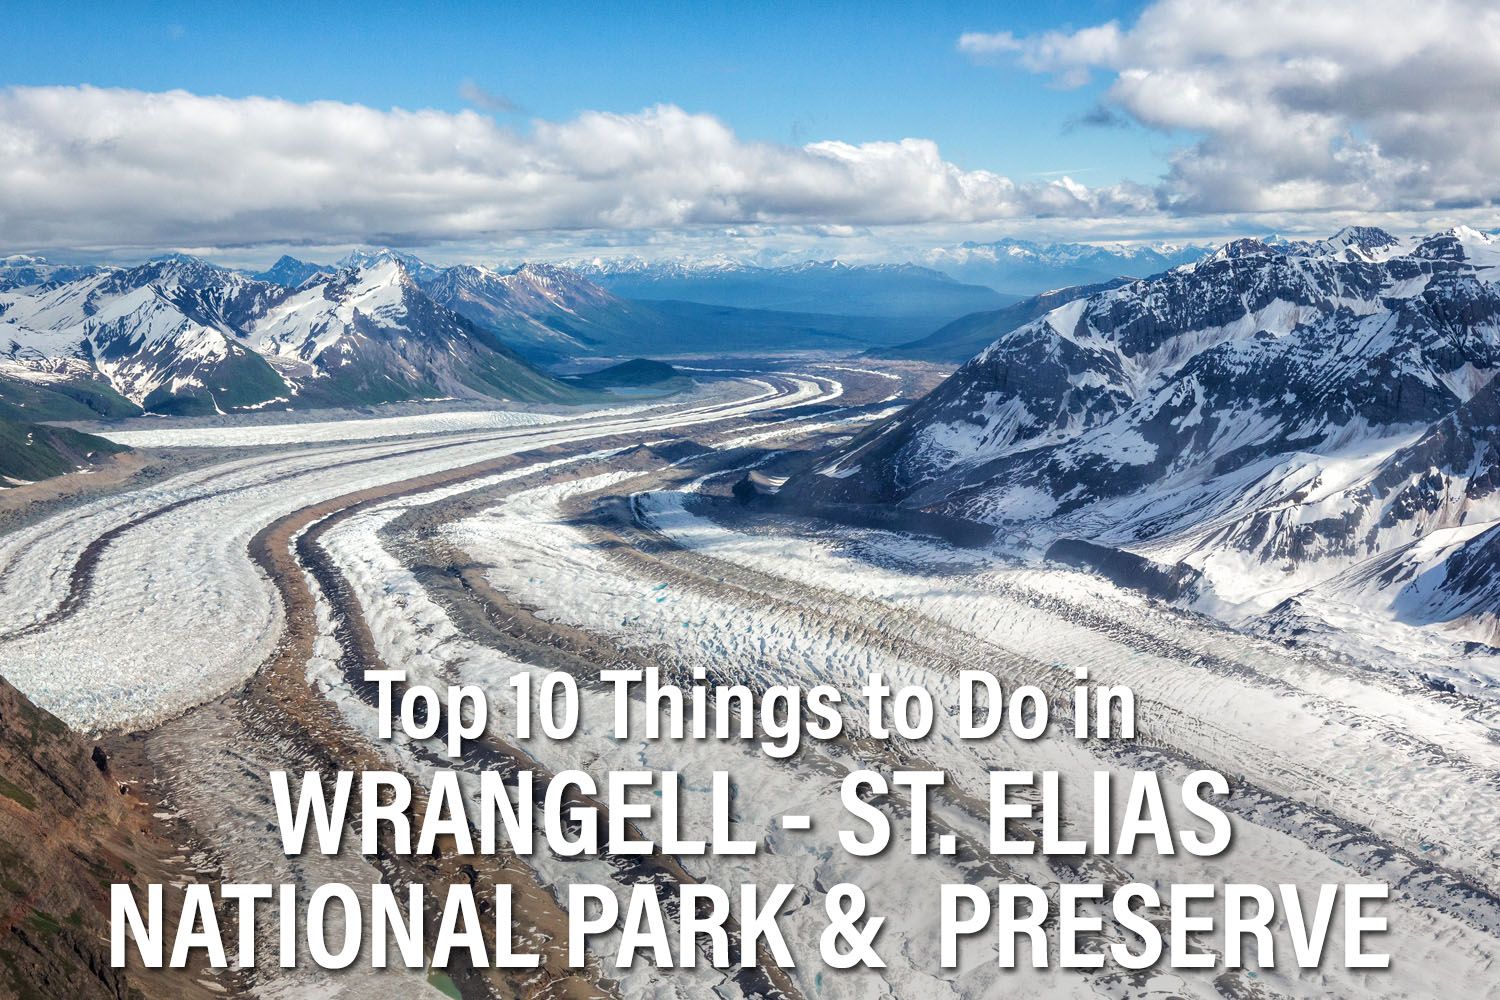 Things to do in Wrangell-St. Elias